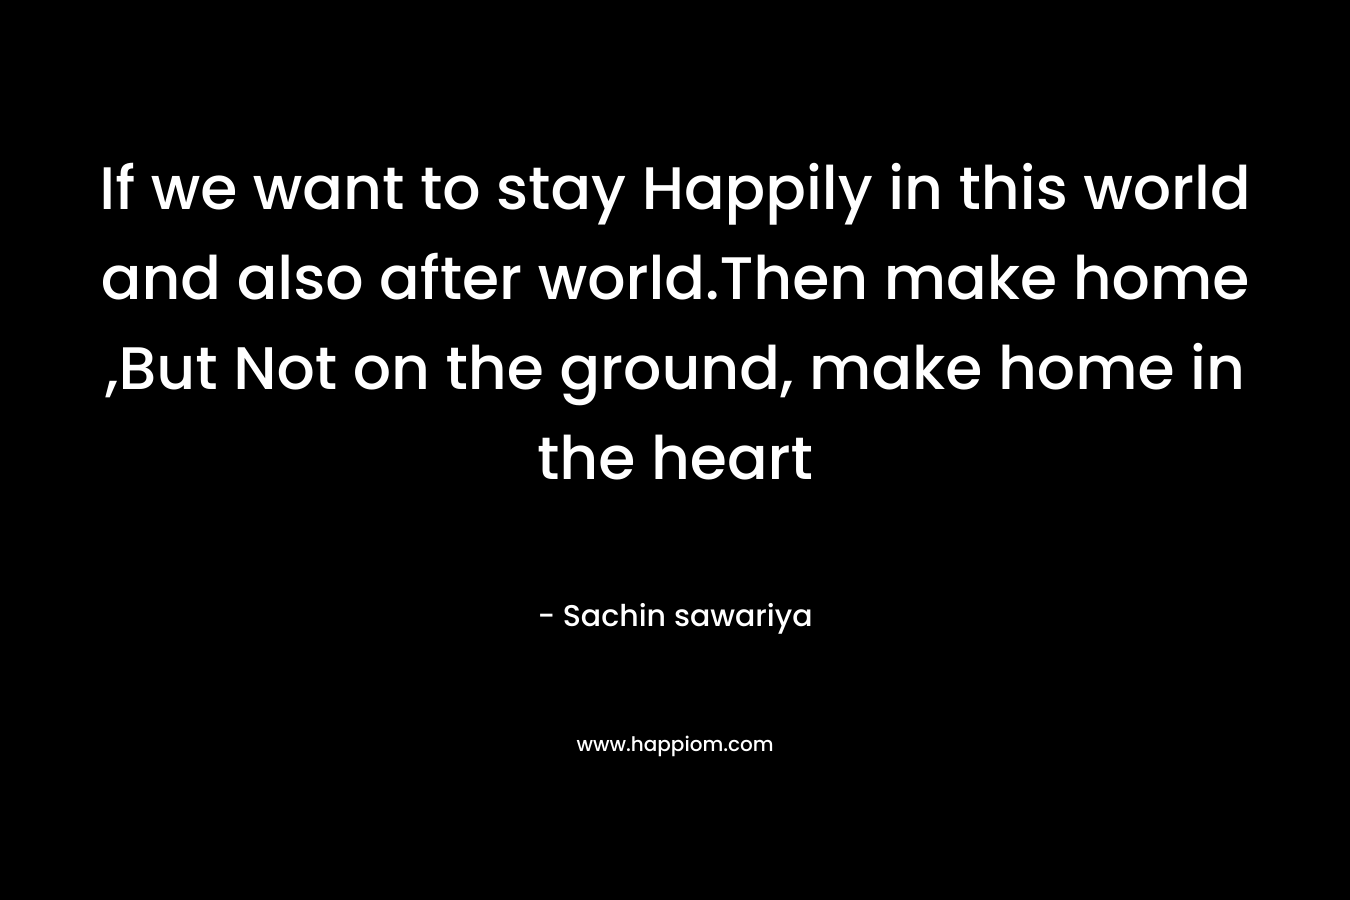 If we want to stay Happily in this world and also after world.Then make home ,But Not on the ground, make home in the heart – Sachin sawariya